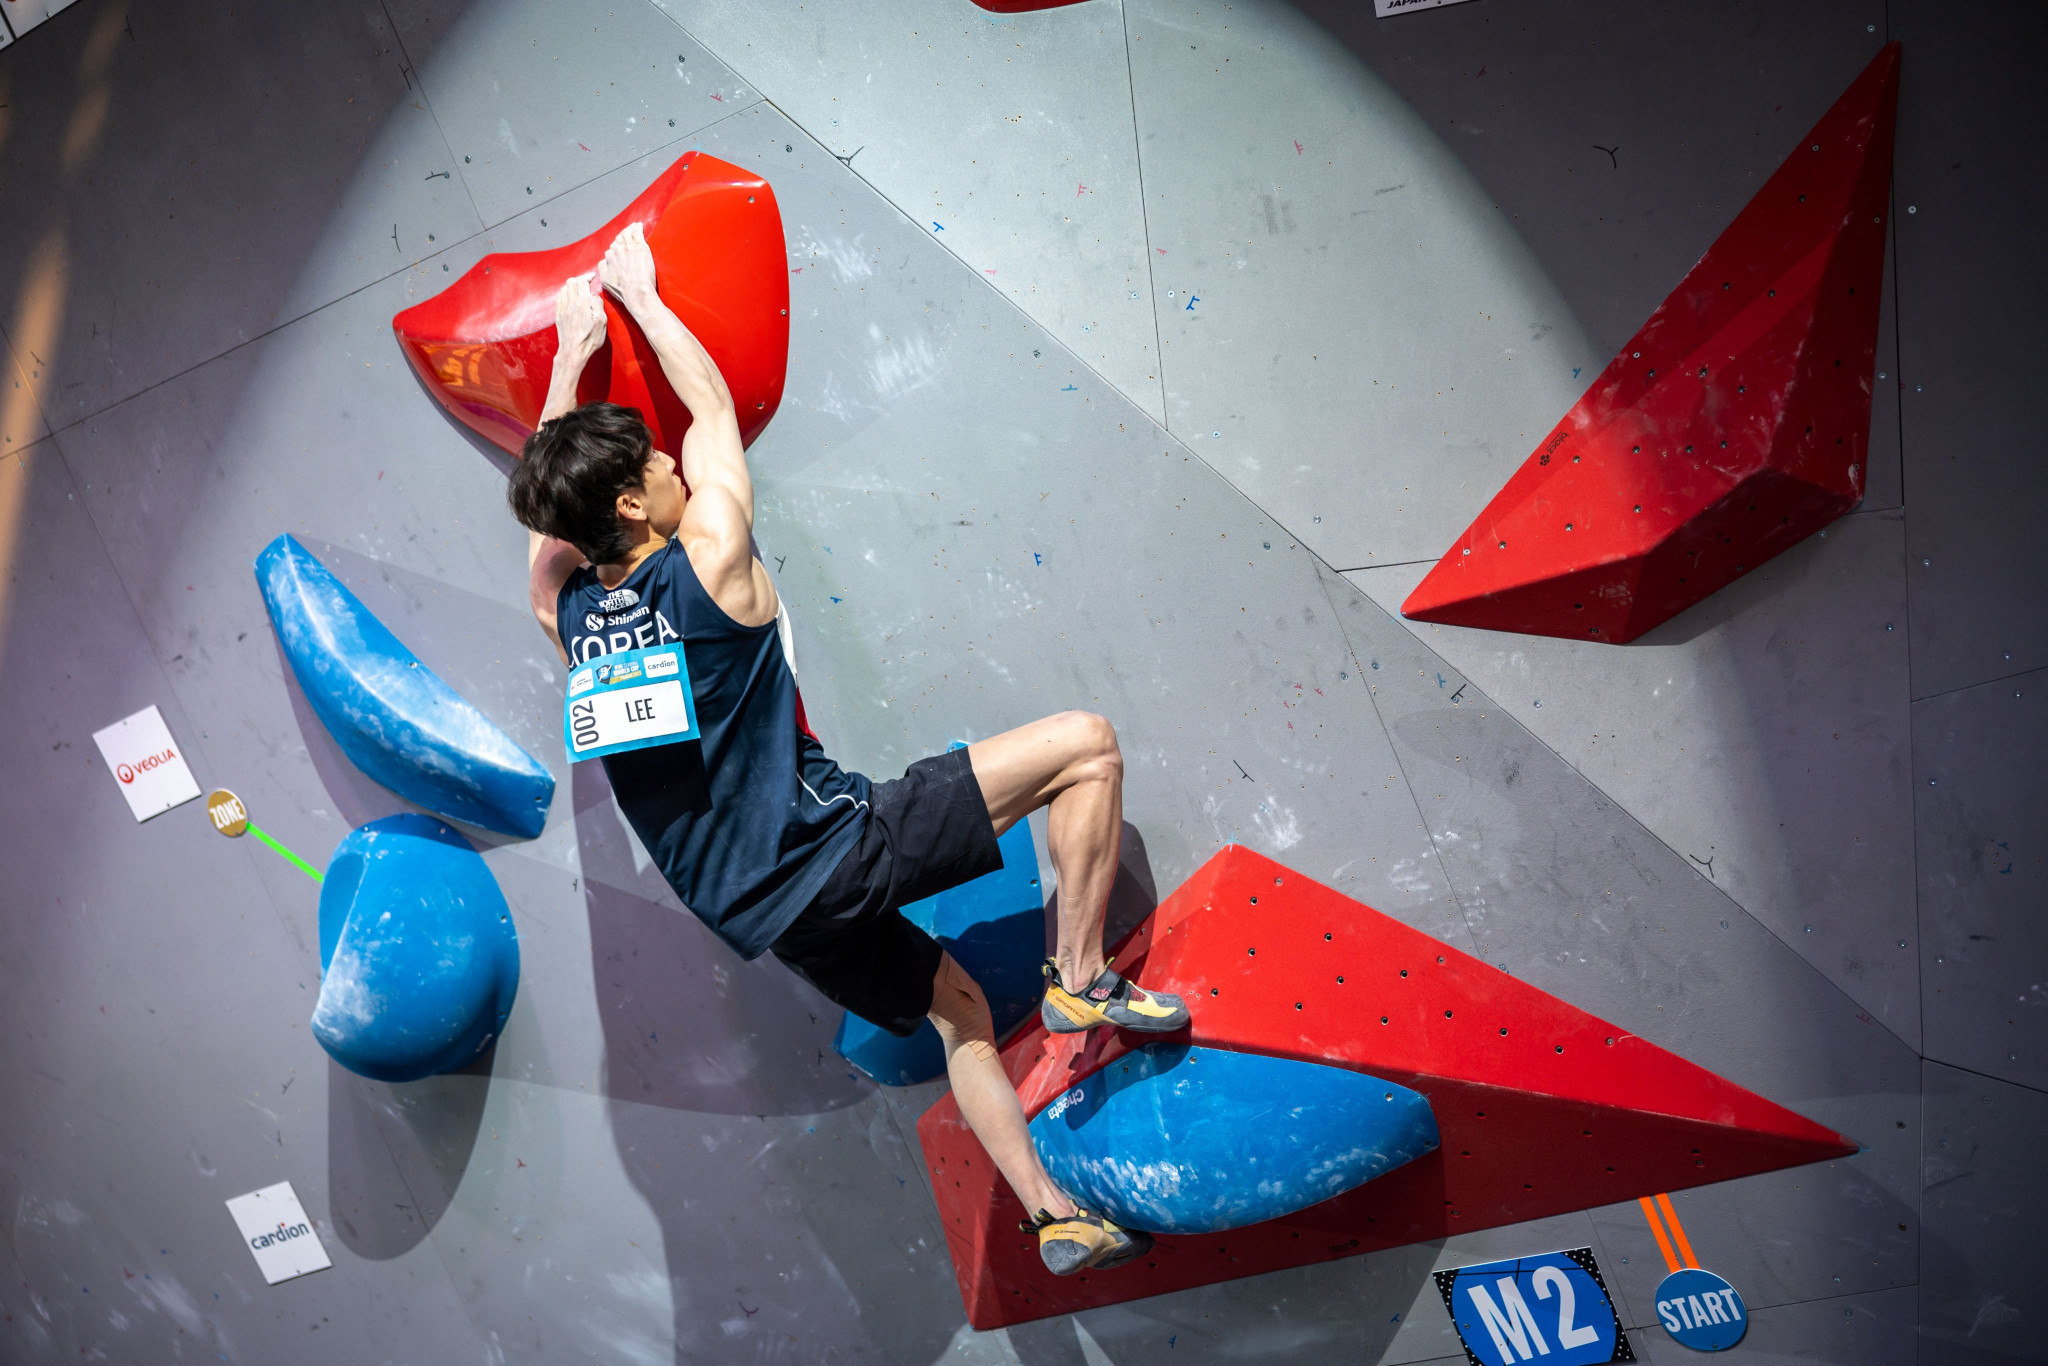 Bertone upsets Olympic champion and Lee reaches first podium at IFSC World Cup